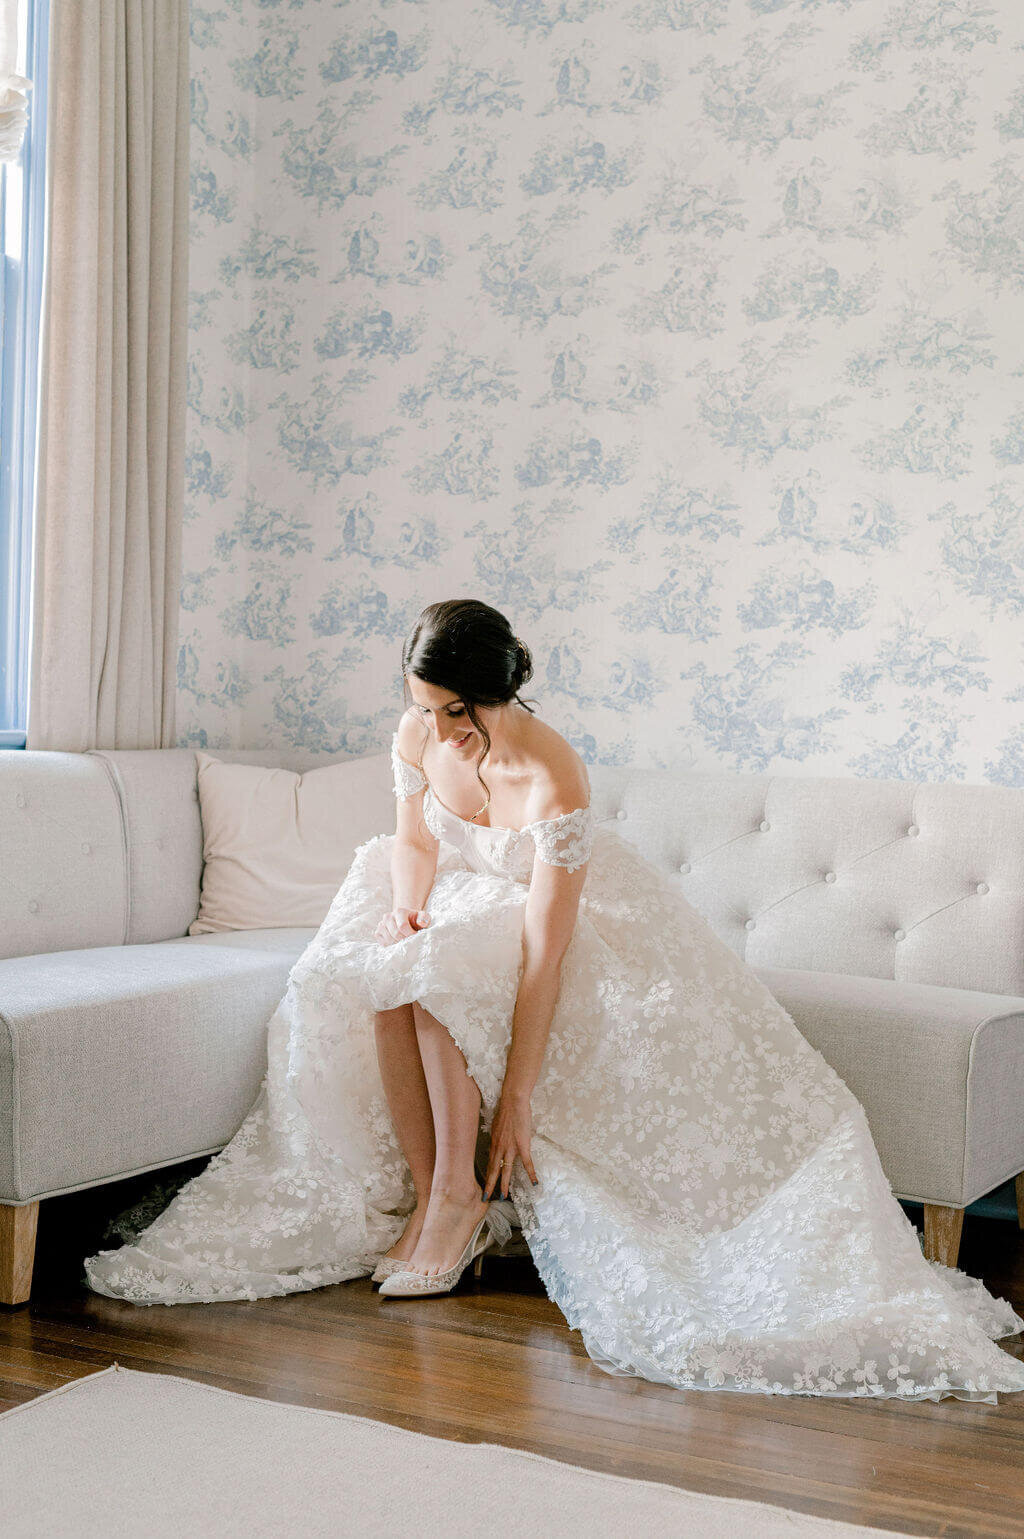 bride in bridal suite putting on shoes during getting ready photos